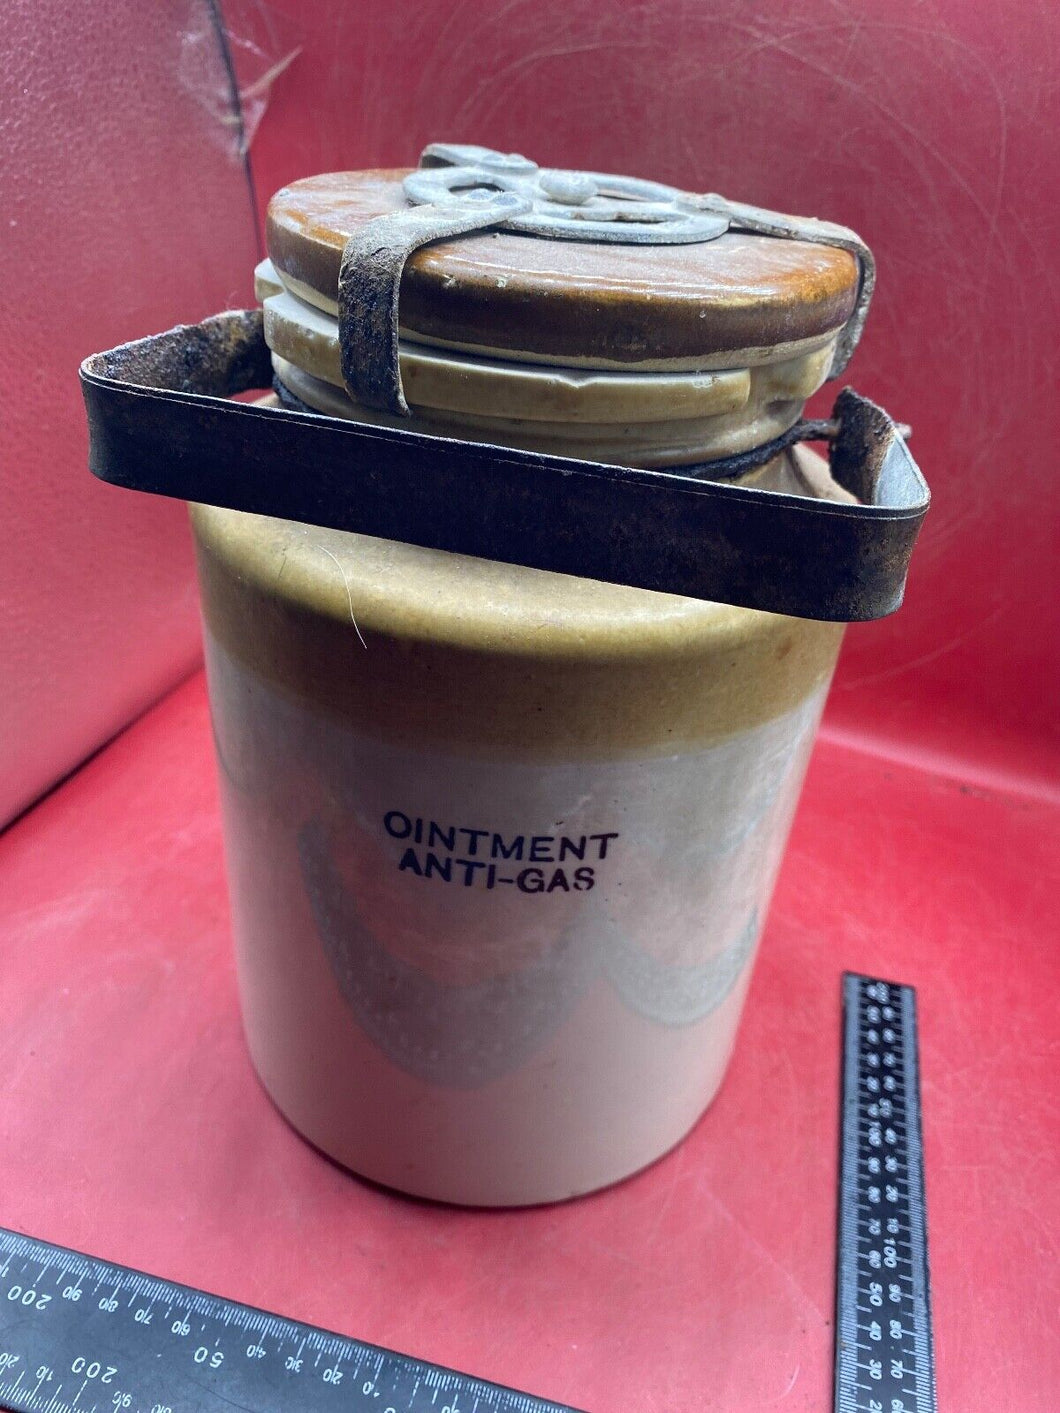 Original WW2 British Army Anti-Gas Ointment Carrying Container with Lid